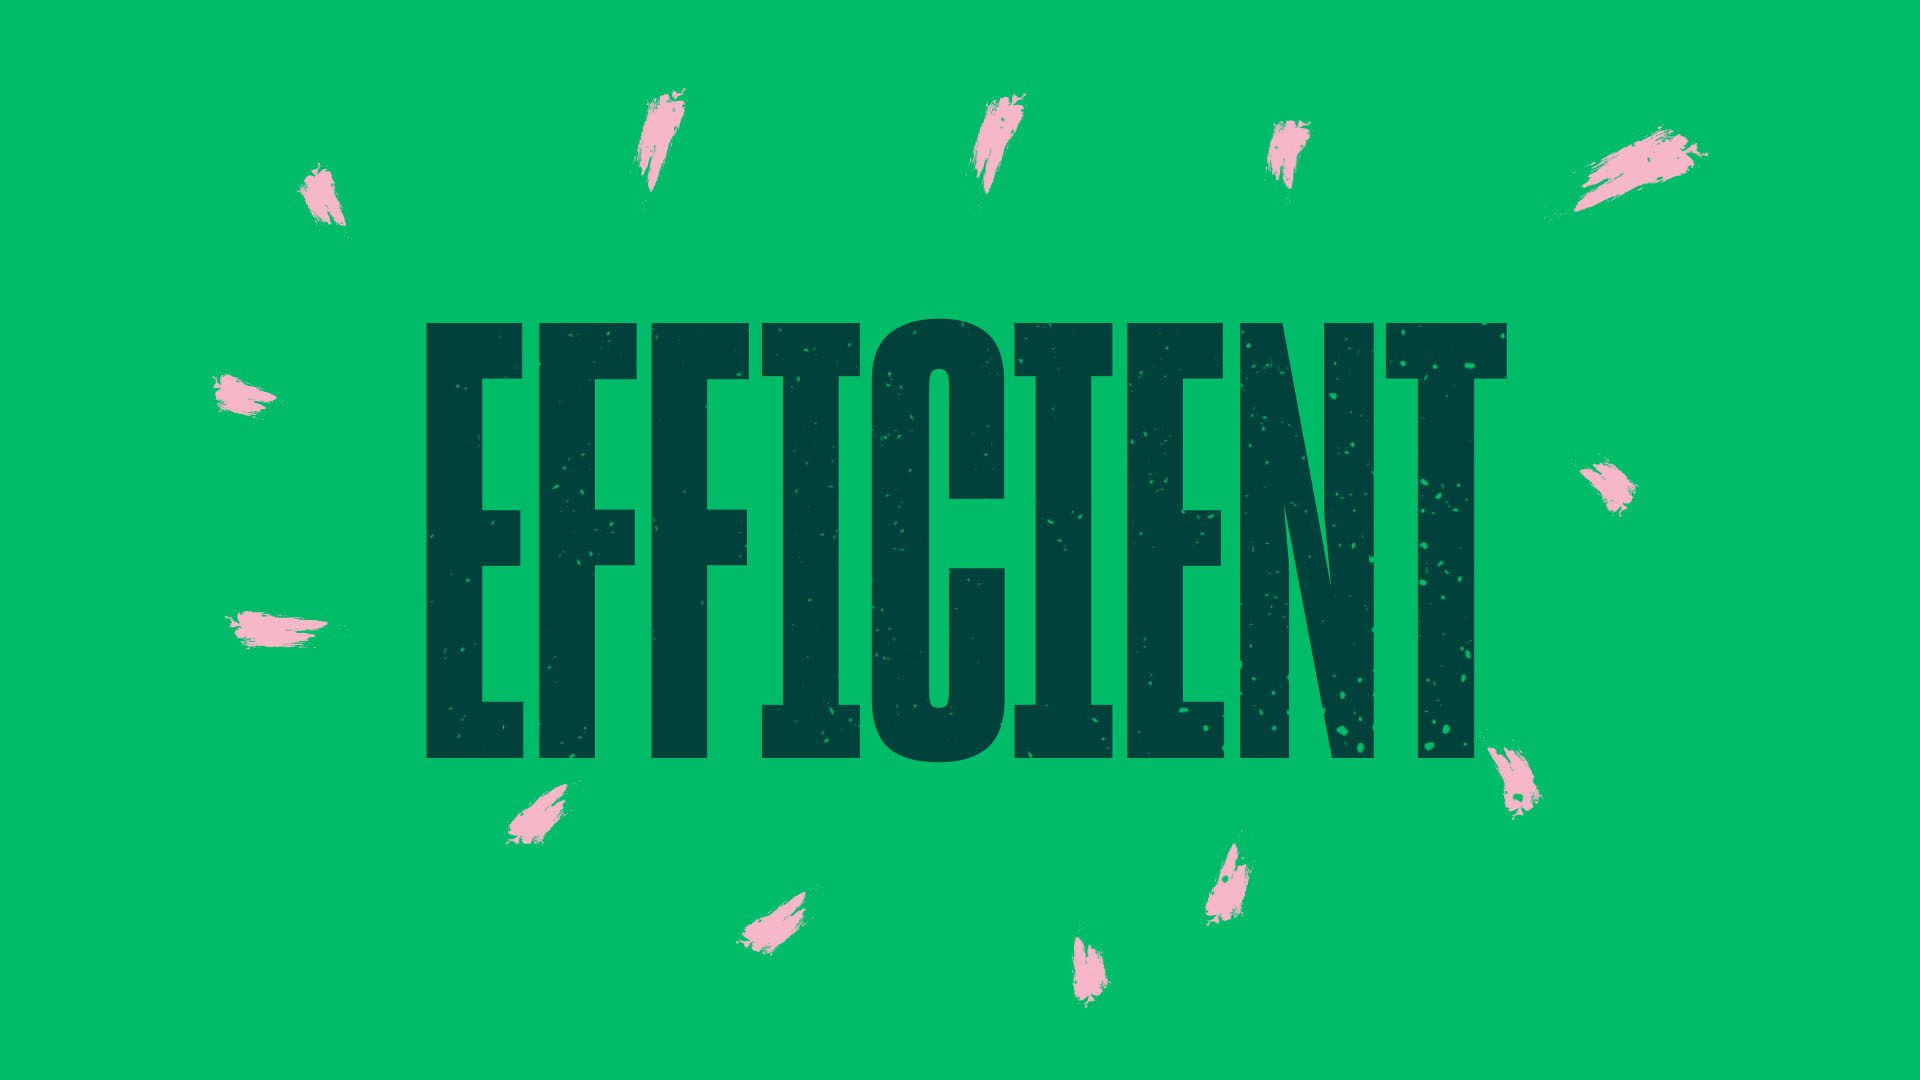 kinetic typography animation london efficient